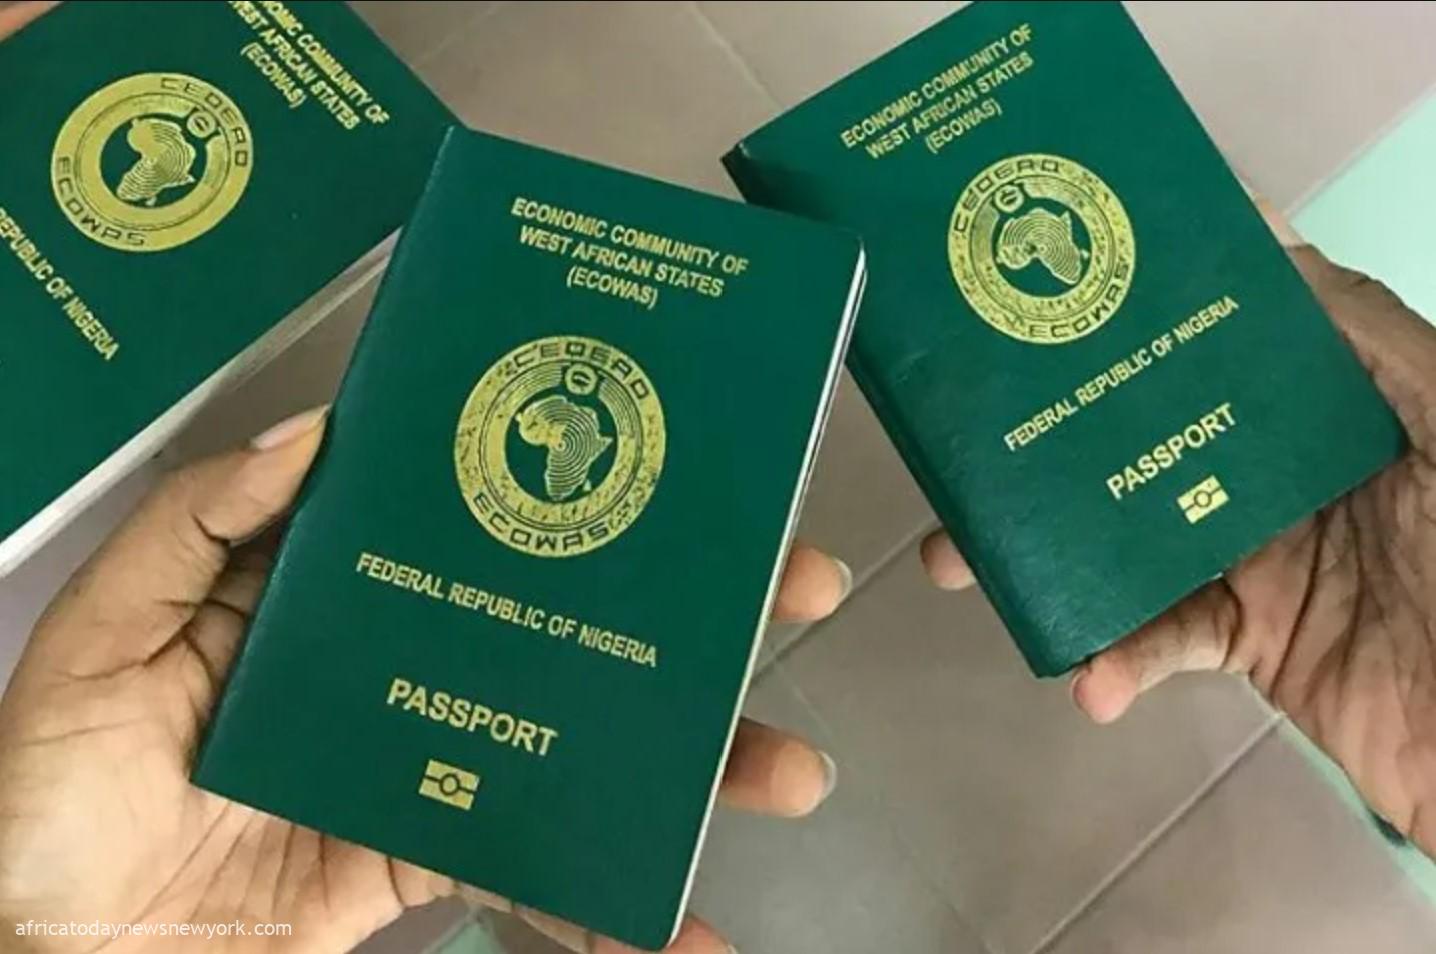 60,000 Passport Backlogs Cleared By NIS In 4 Days – FG